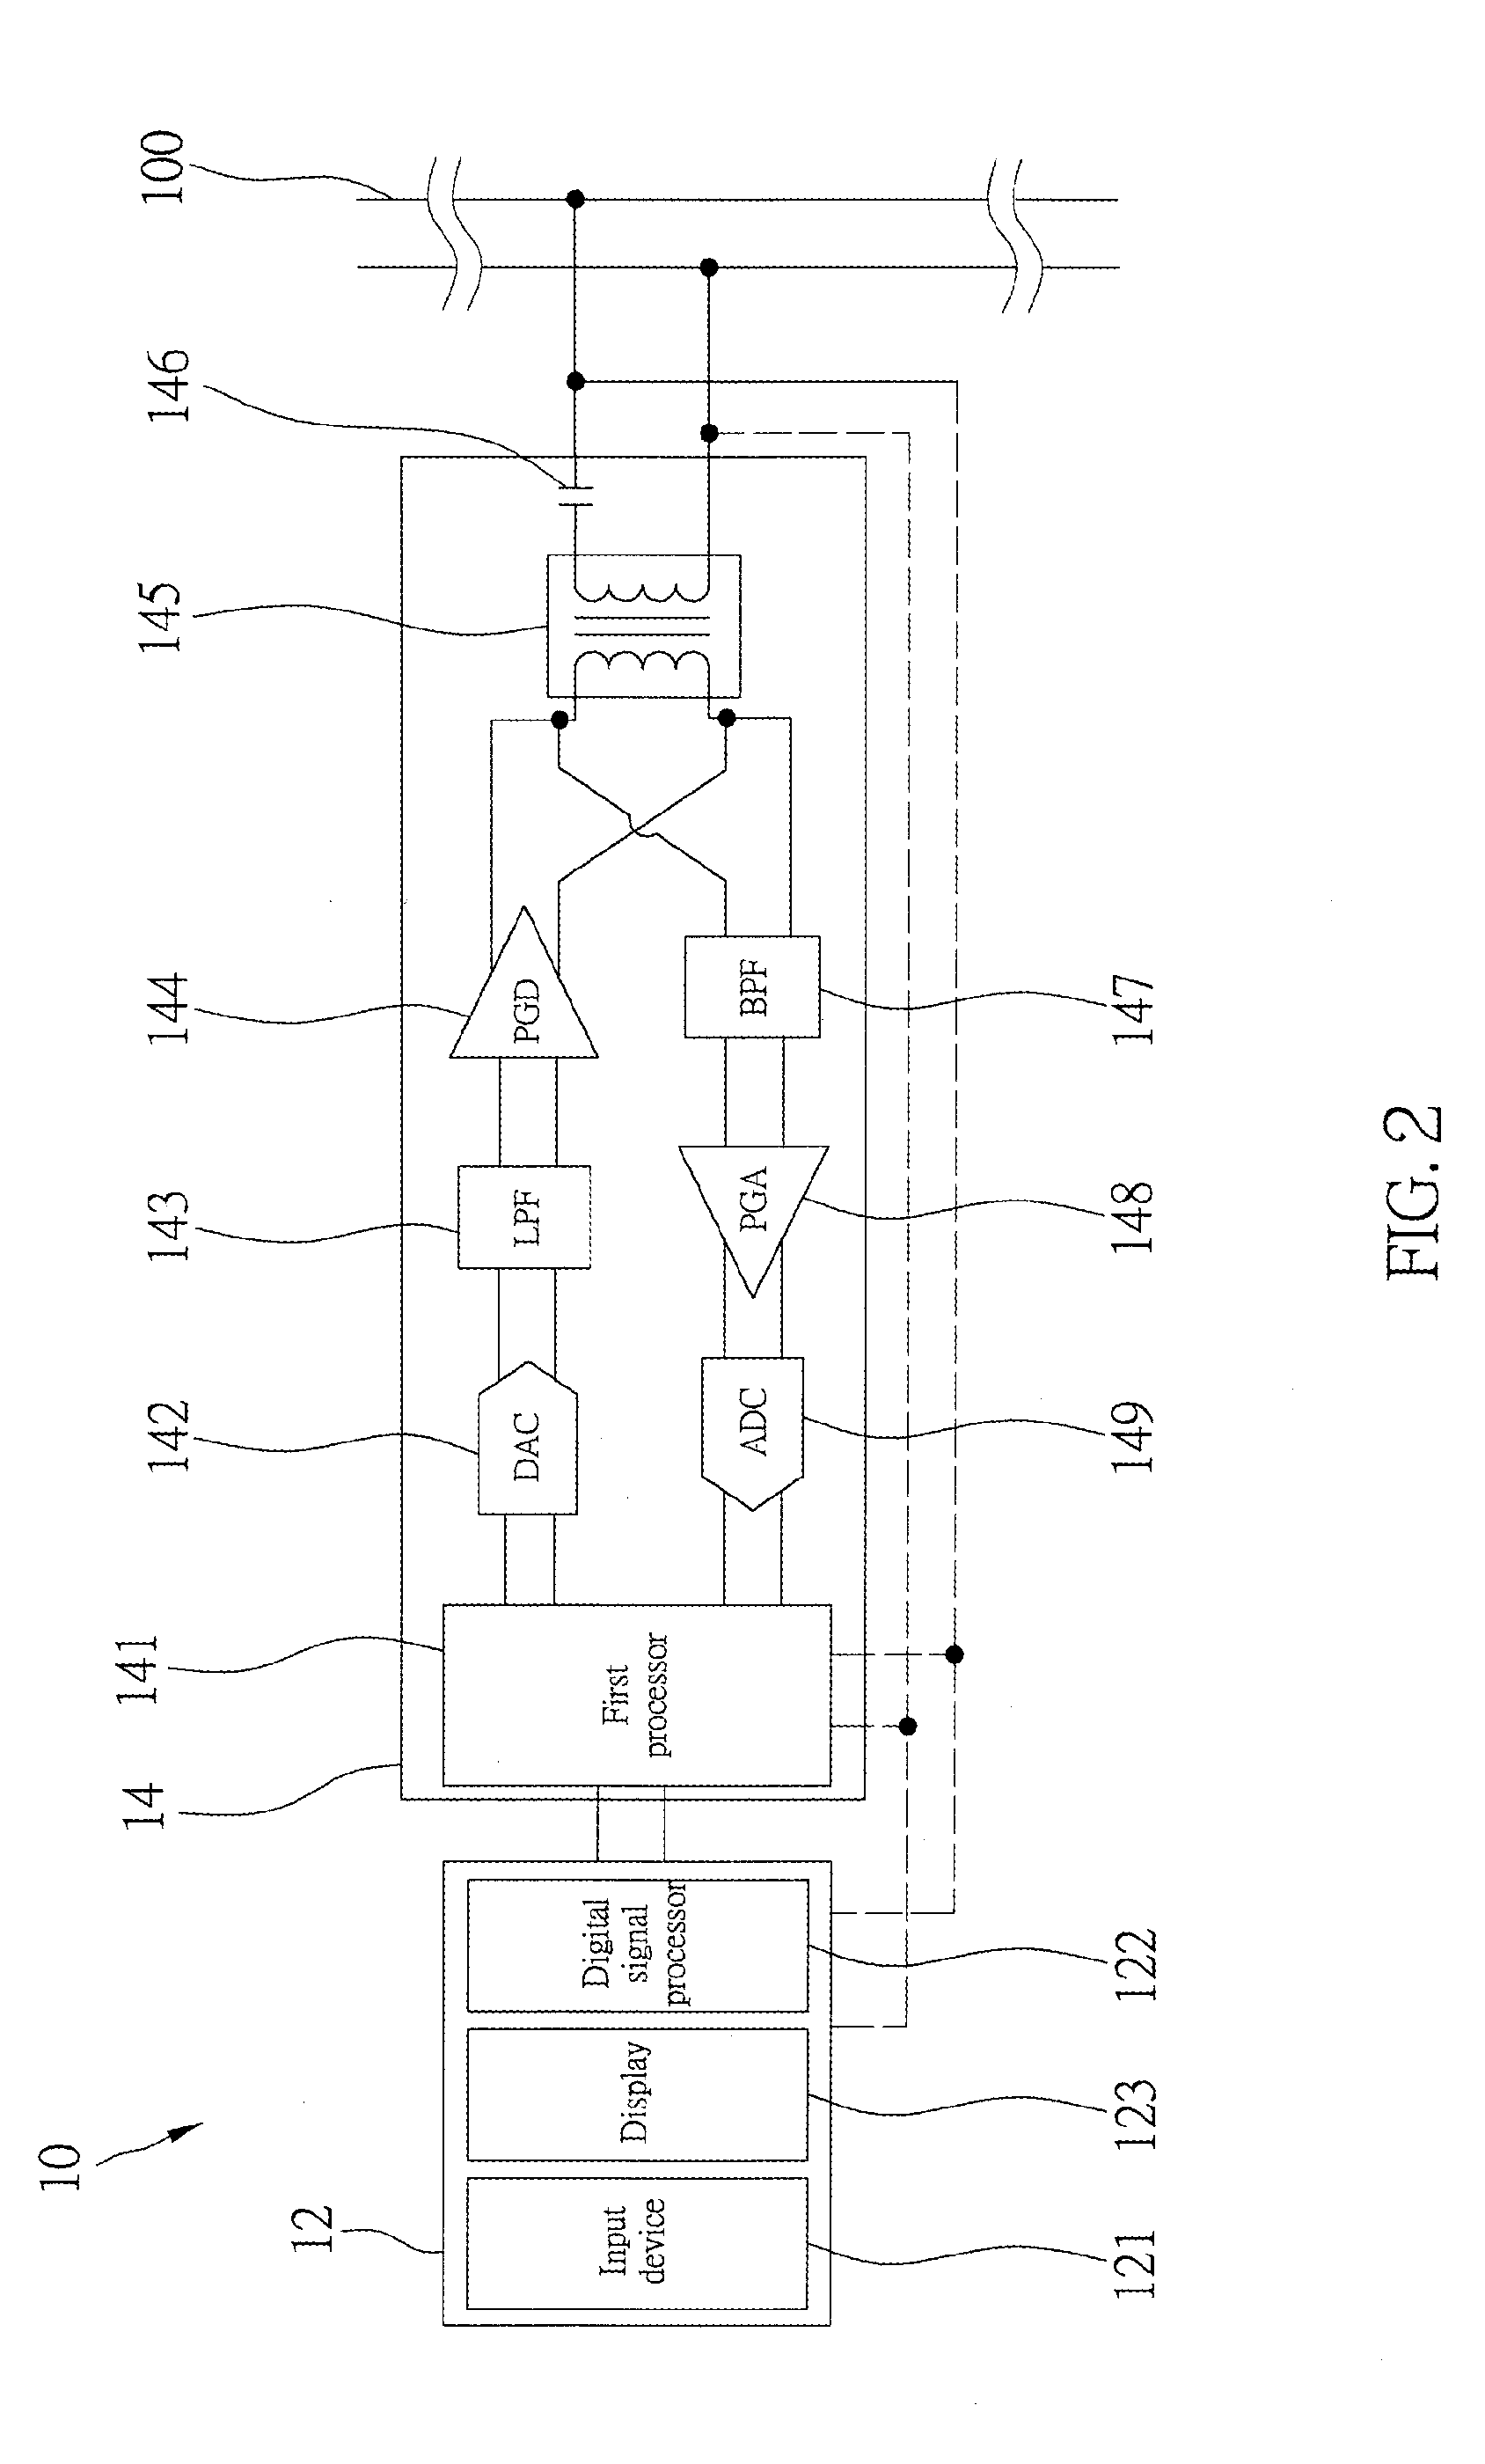 Motor control system and the method of controlling motor